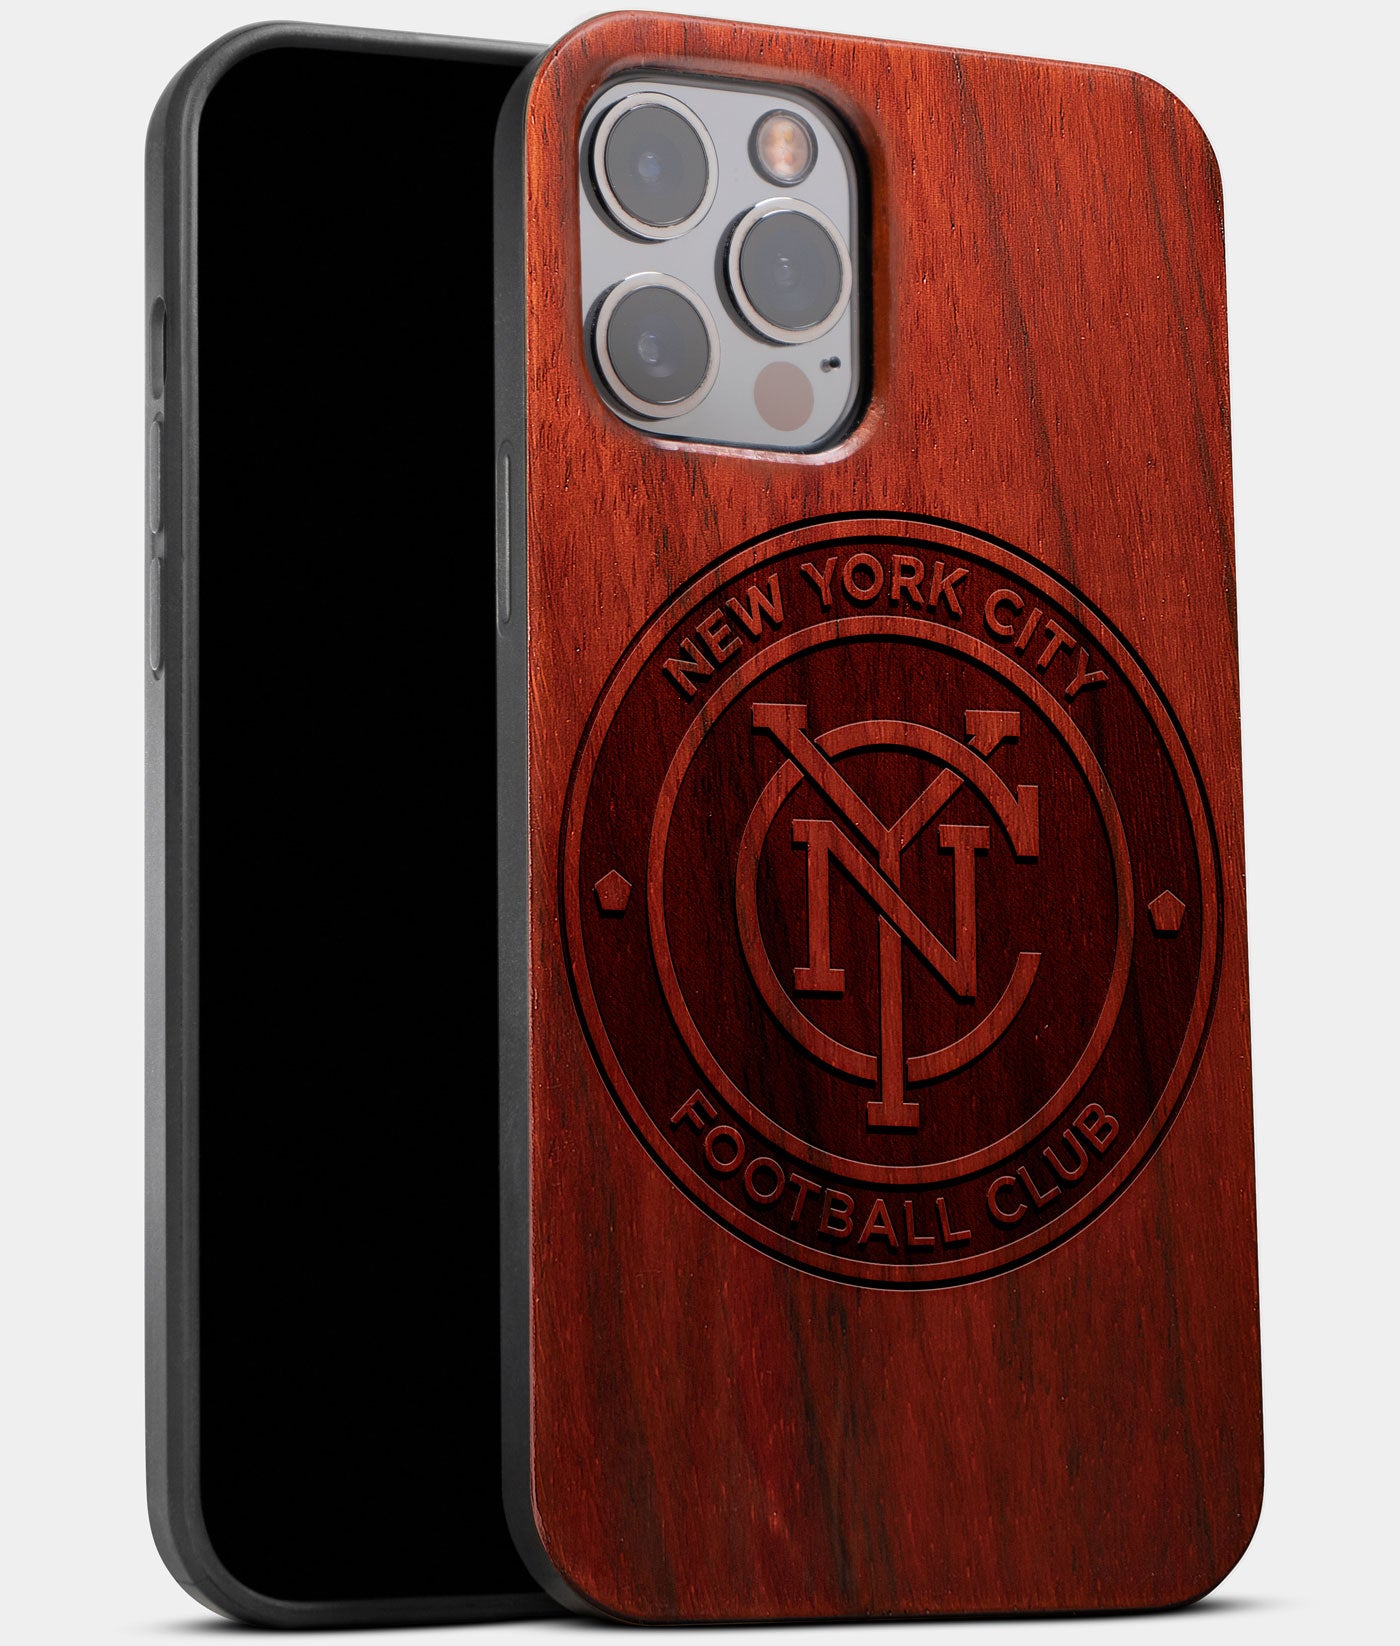 Best Wood New York City FC iPhone 13 Pro Max Case | Custom NY City FC Gift | Mahogany Wood Cover - Engraved In Nature